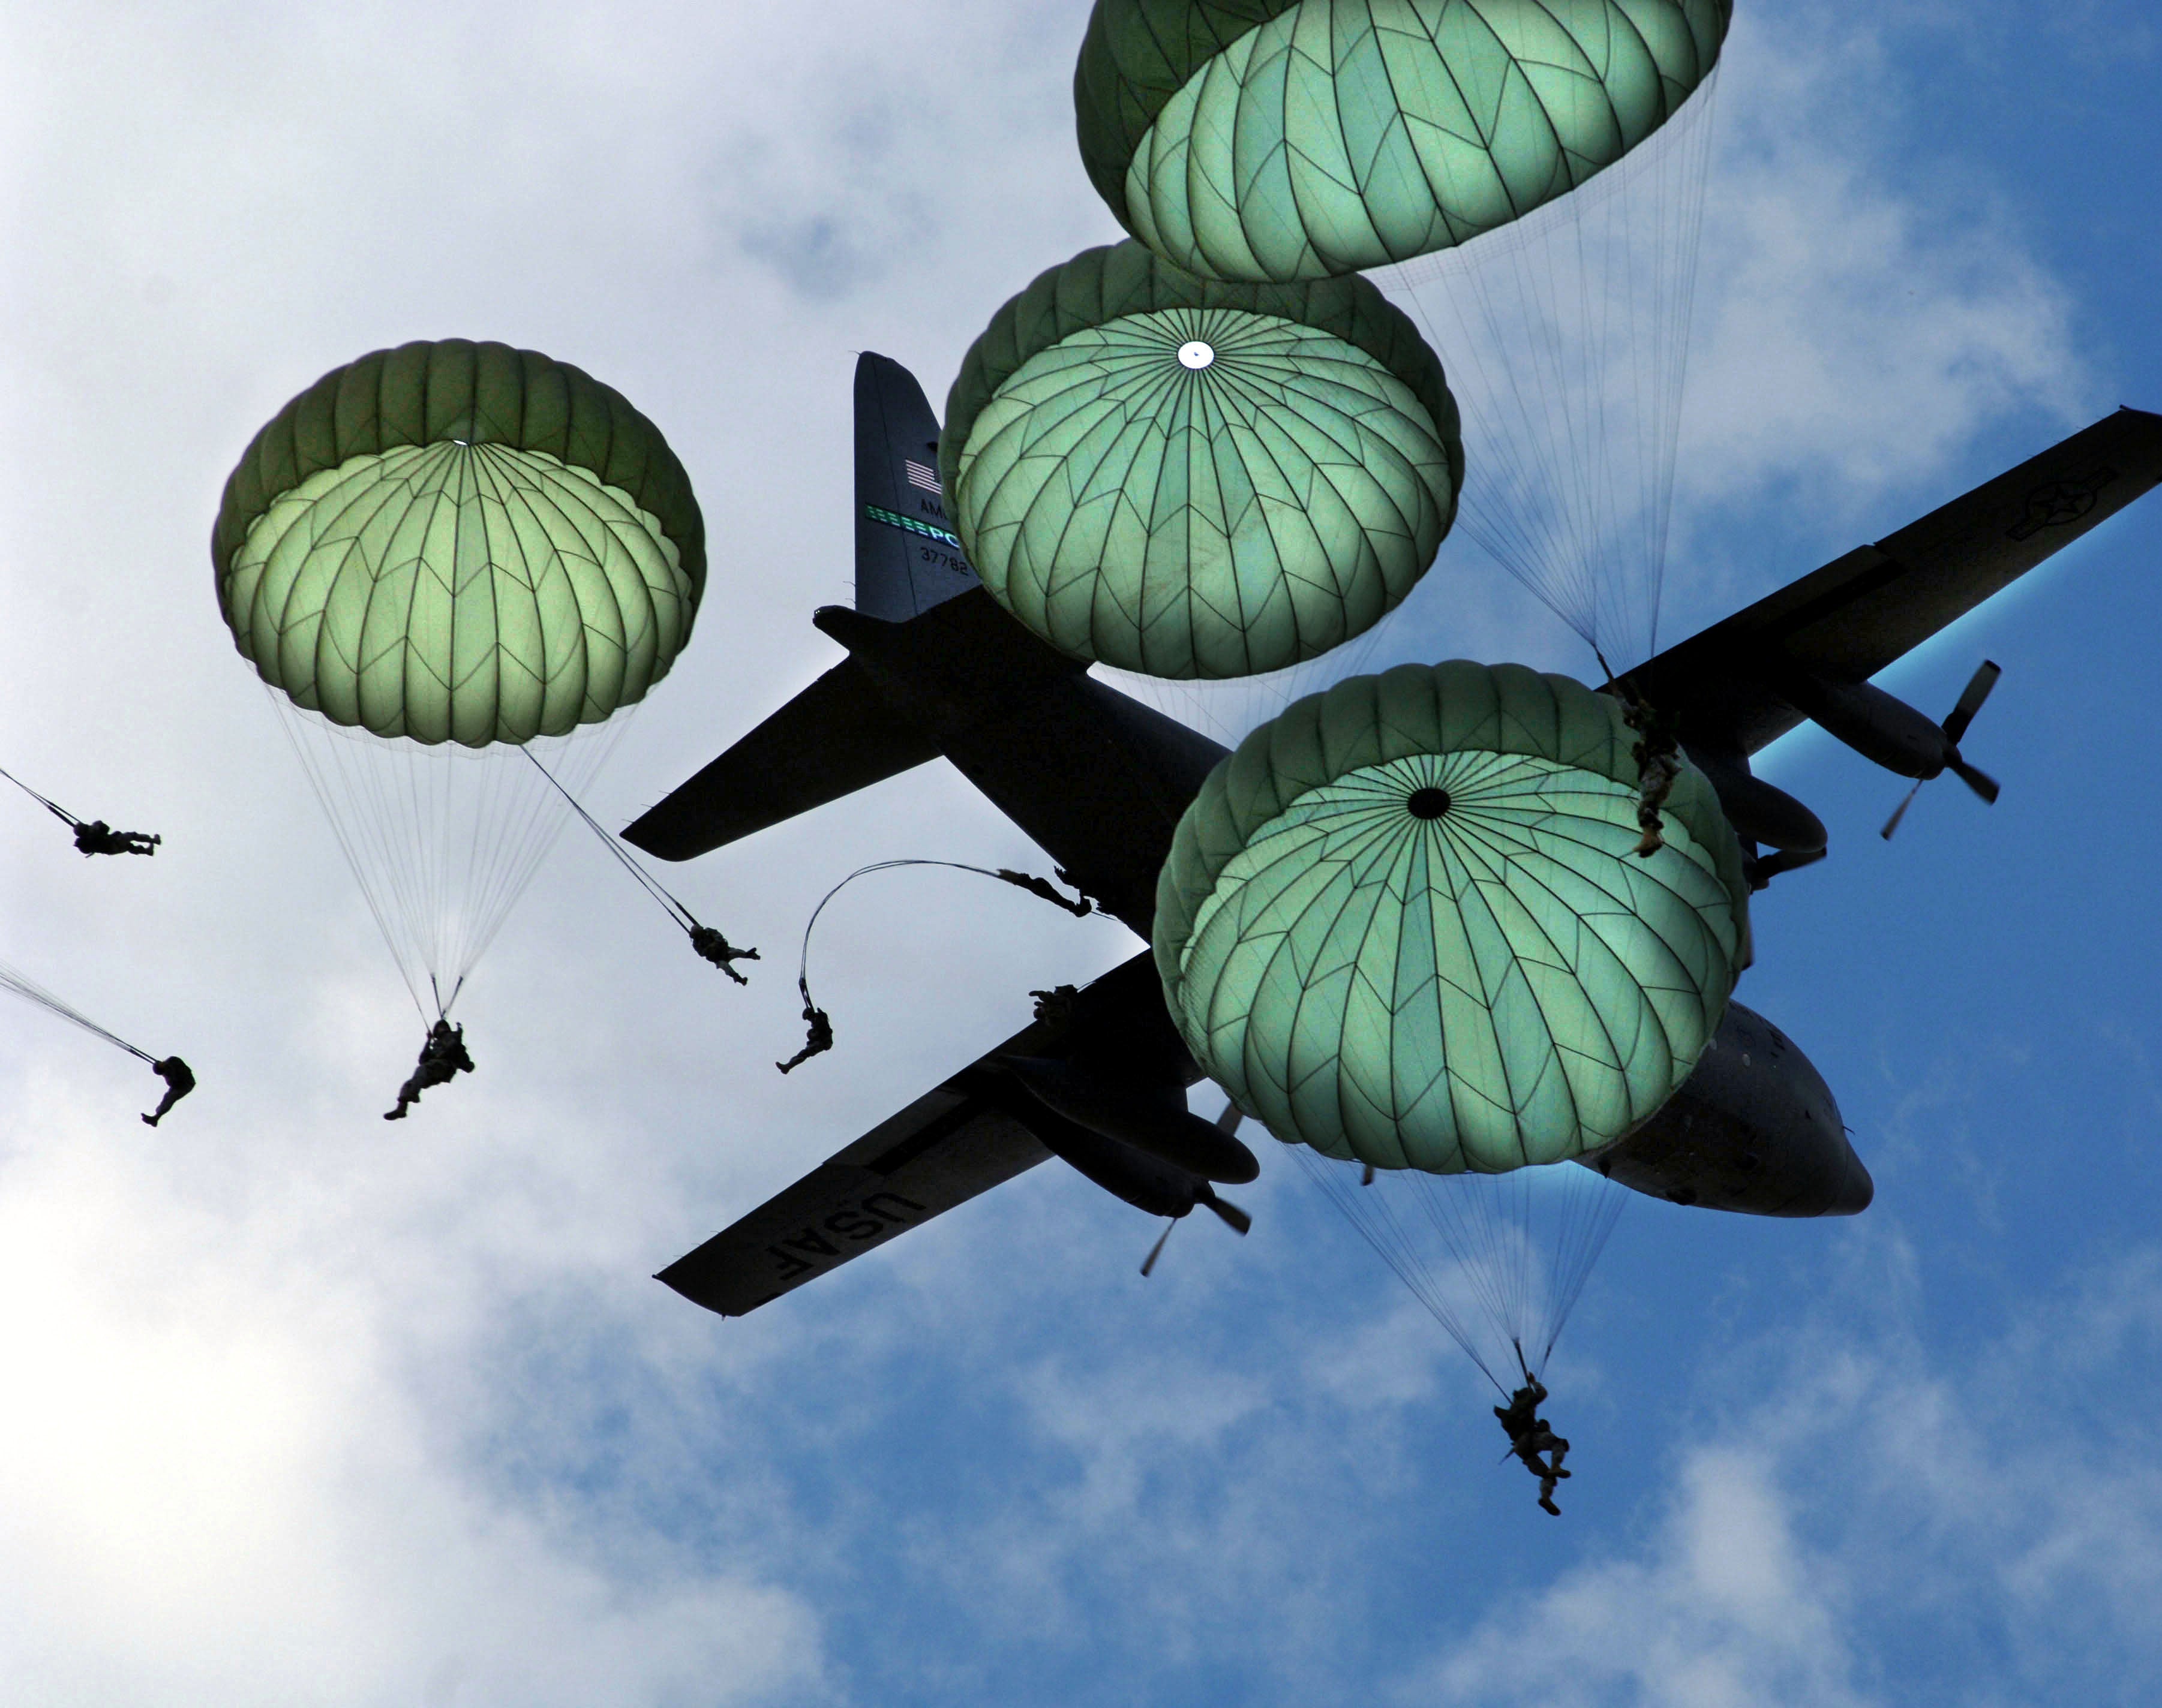 While the use of paratroopers would be similar to that of D-Day, today's transports can deliver a lot more than just troops.

(US Army)